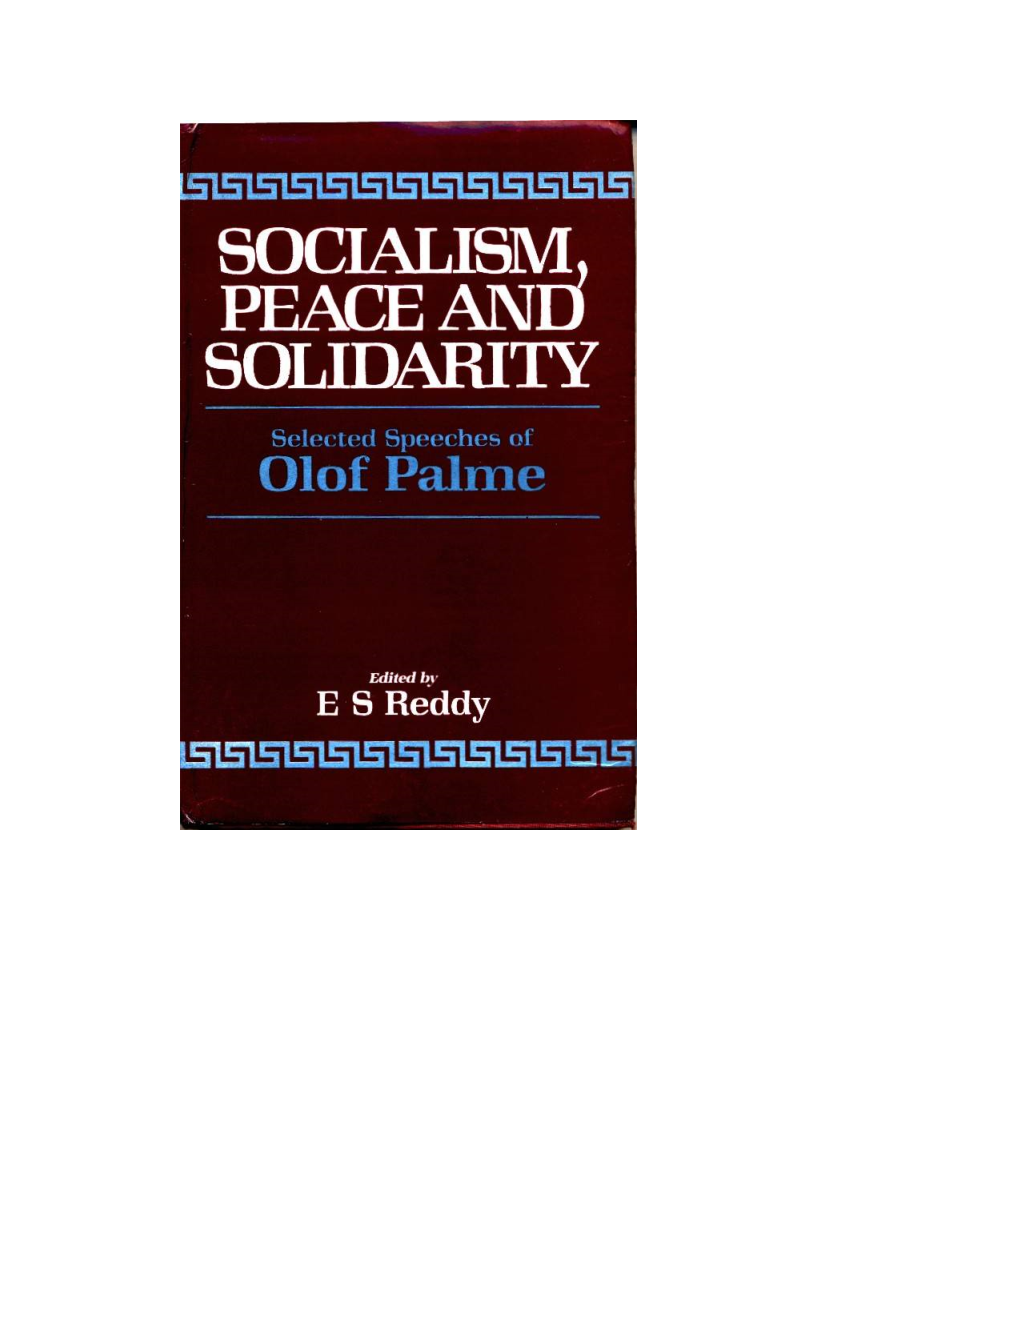 Socialism, Peace and Solidarity: Selected Speeches of Olof Palme